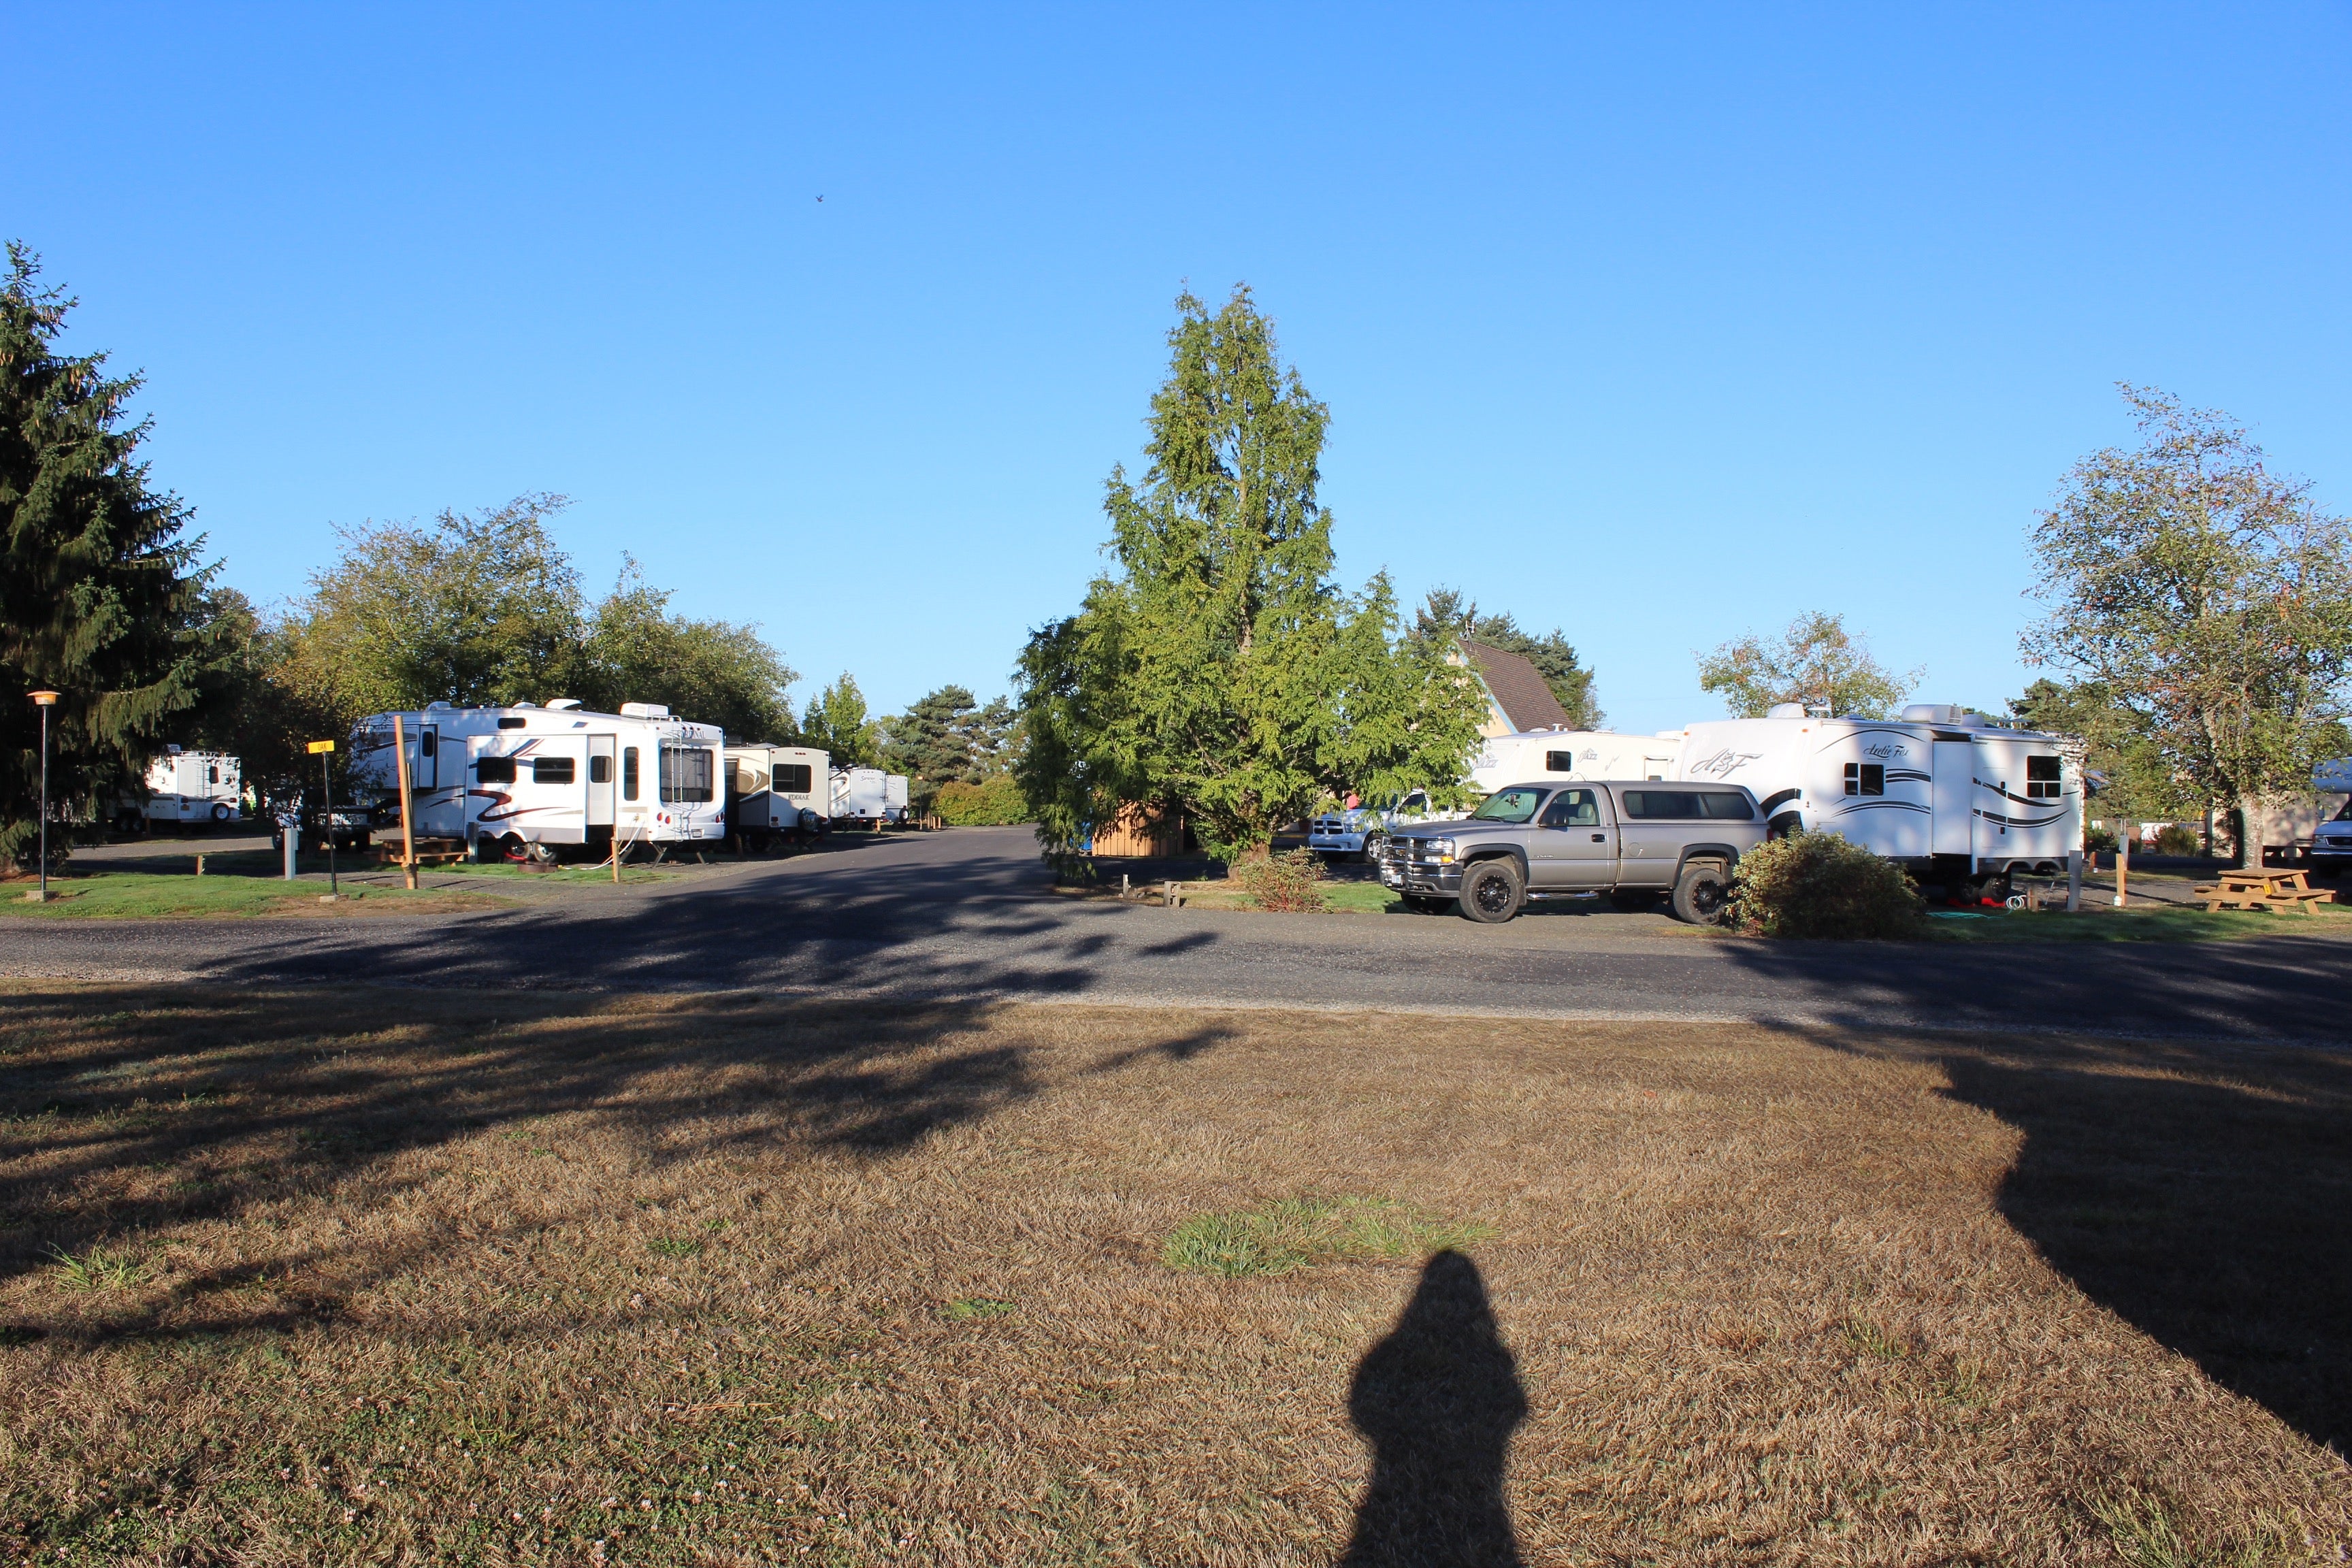 Another angle of RV sites and park